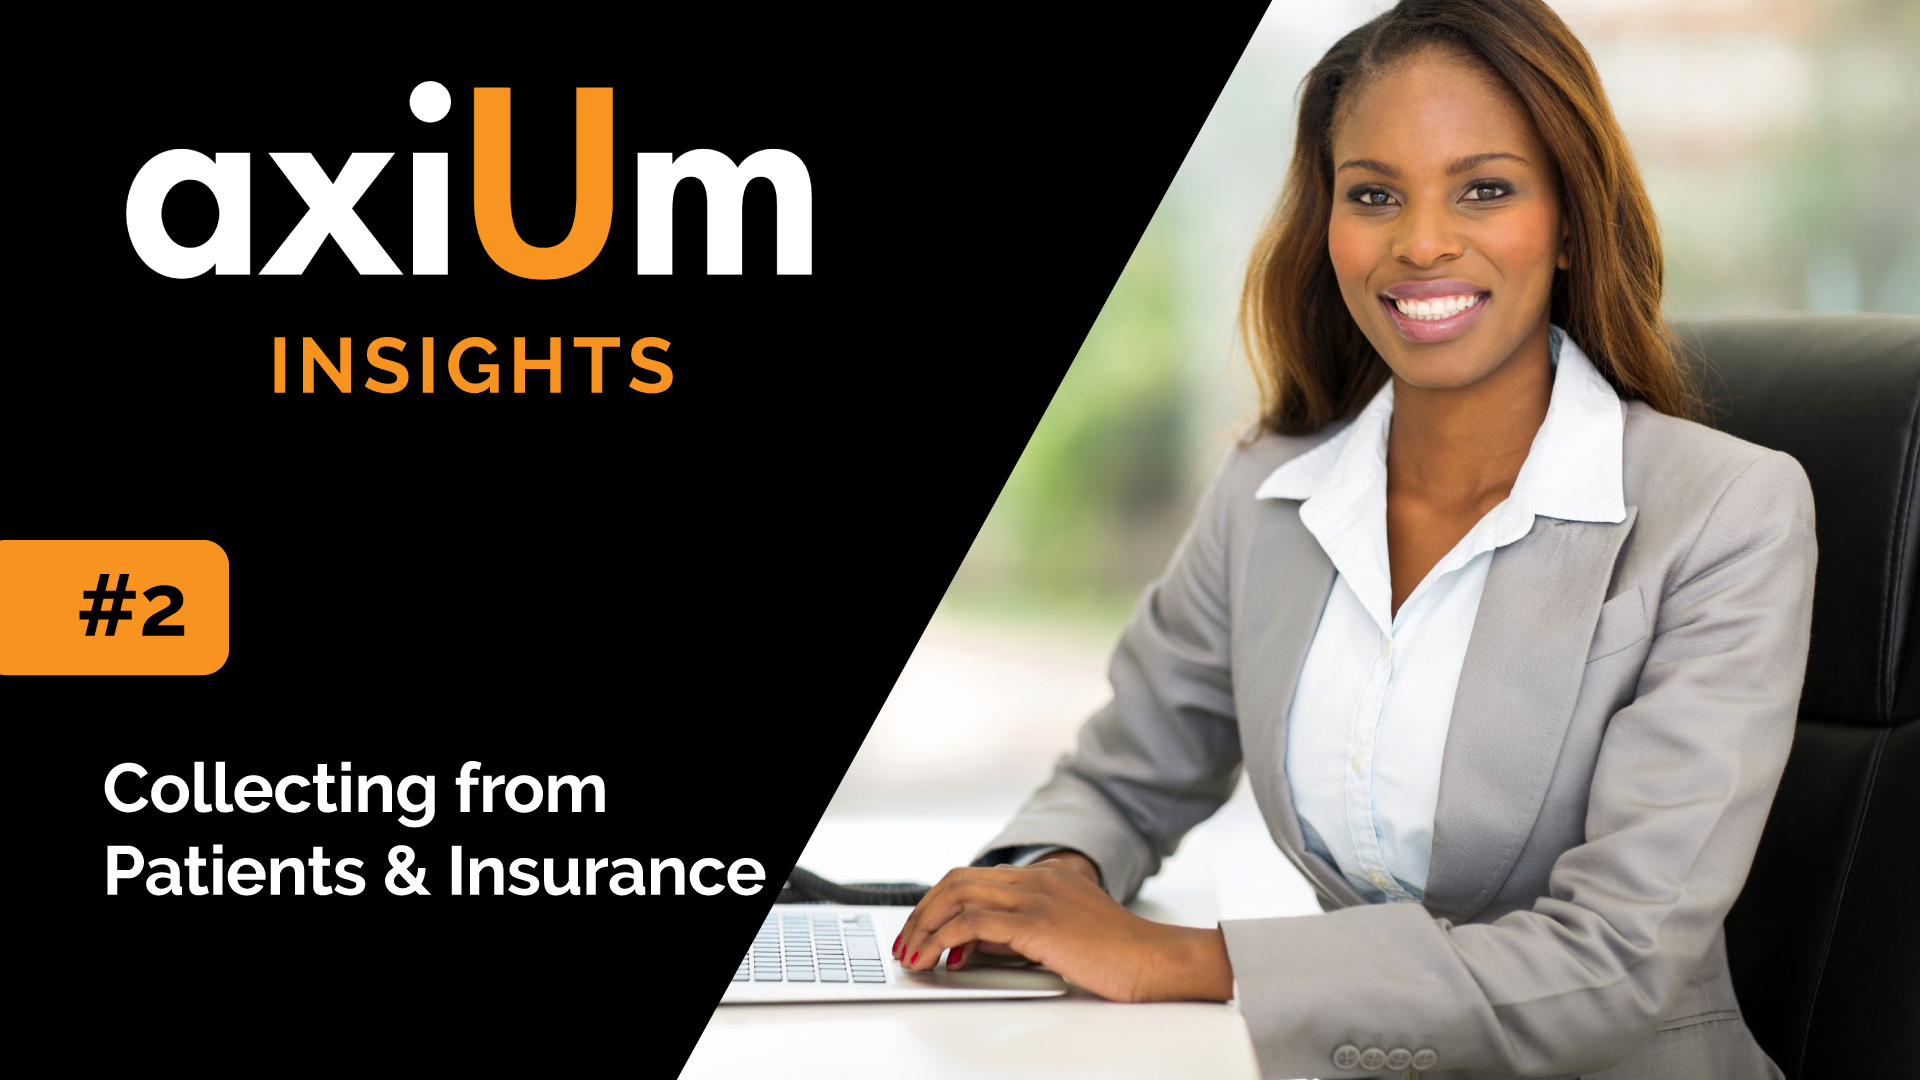 axiUm Insights #2 – Collecting from Patients and Insurance